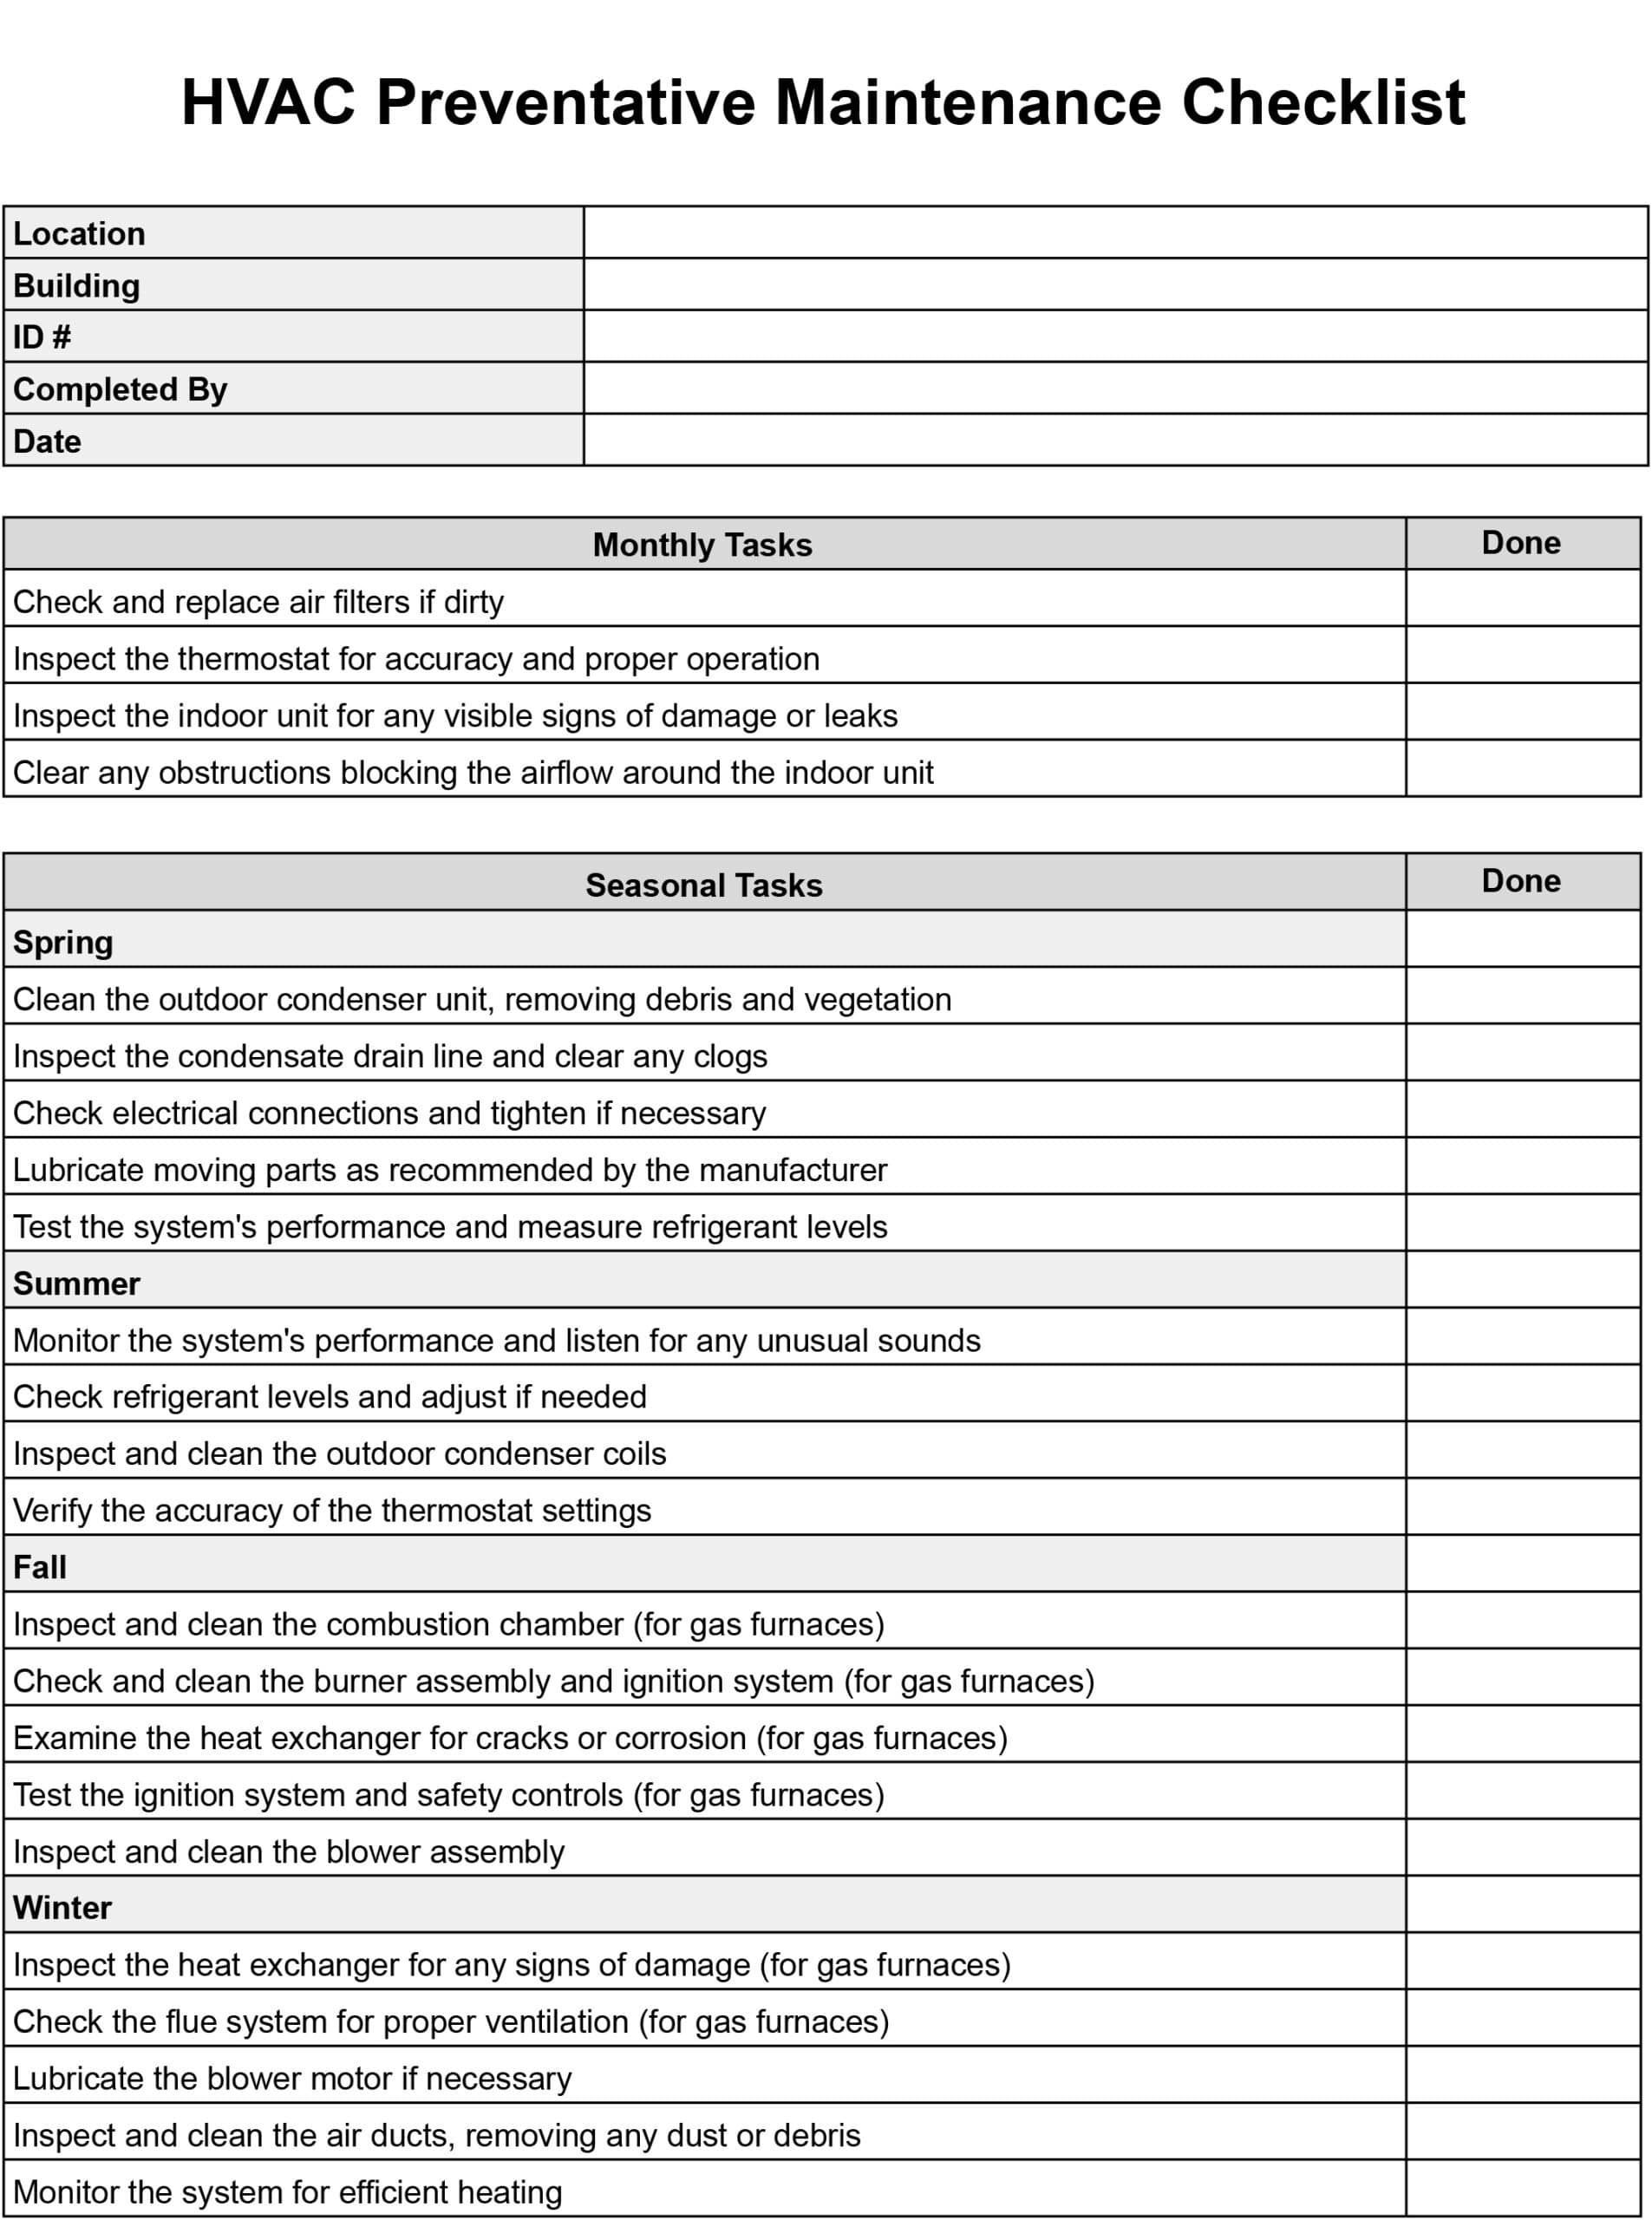 Preventive Maintenance Forms Examples